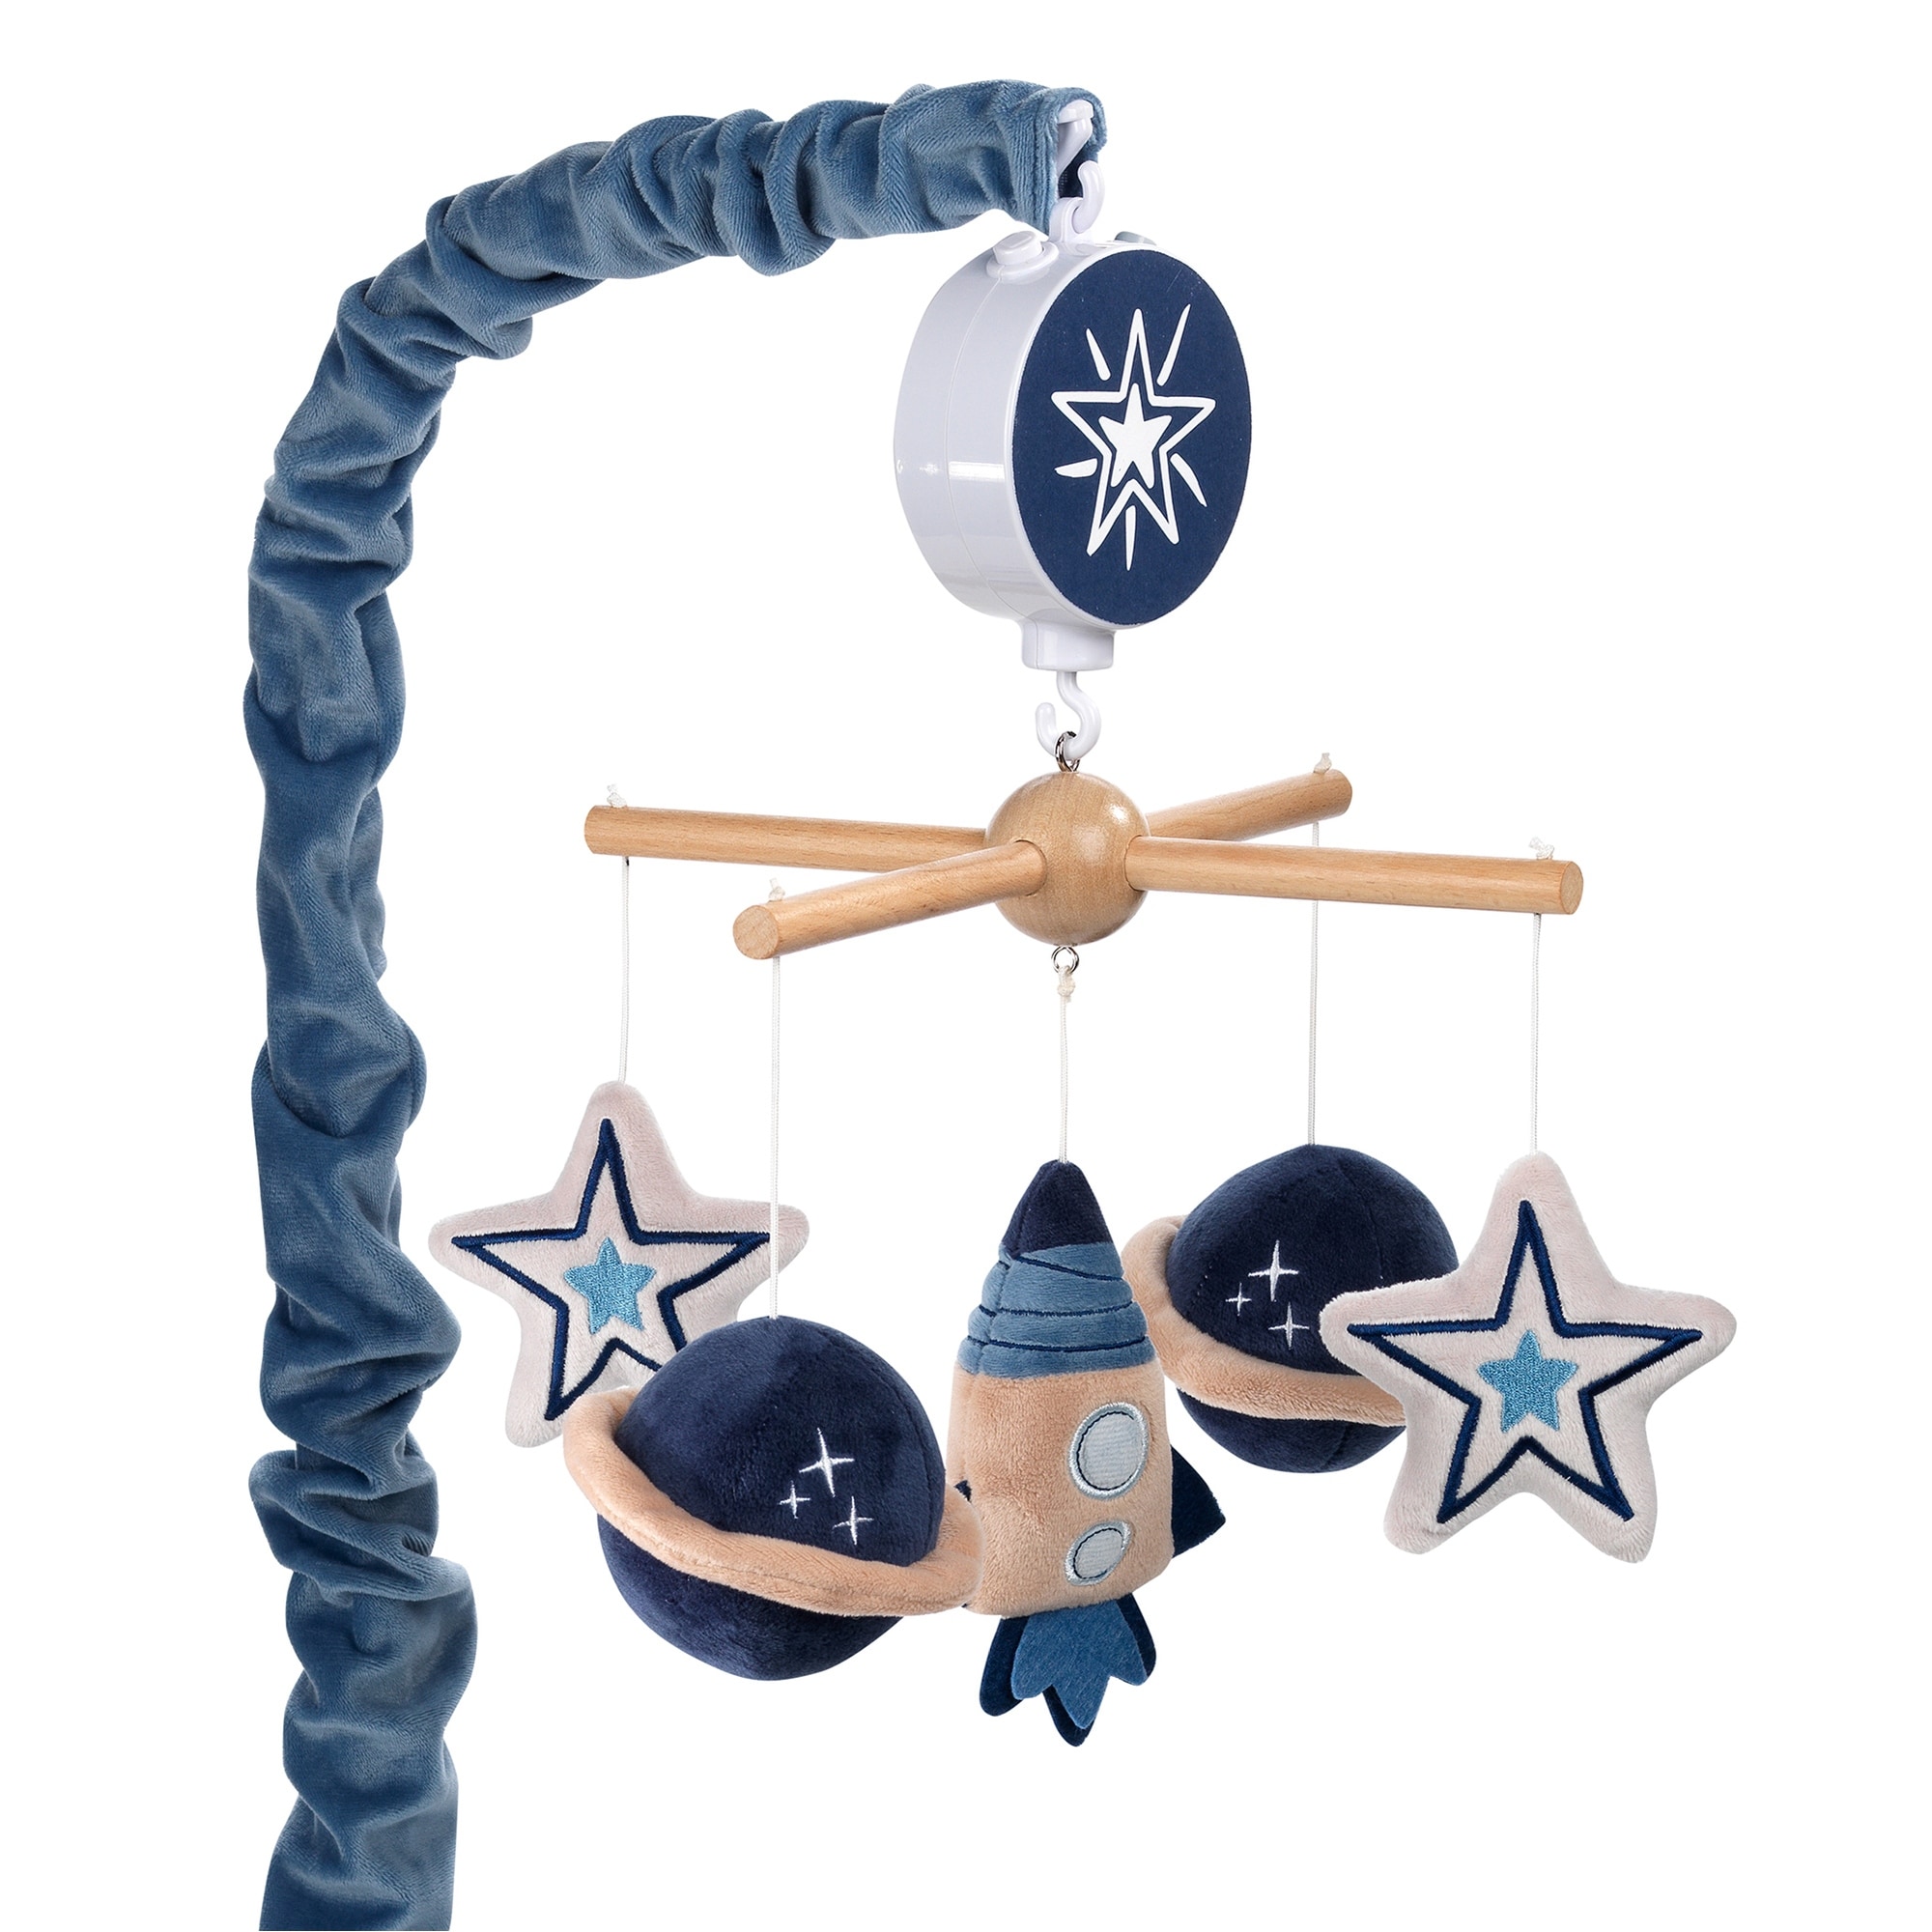 Lambs & Ivy Sky Rocket Planets/Stars Musical Baby Crib Mobile